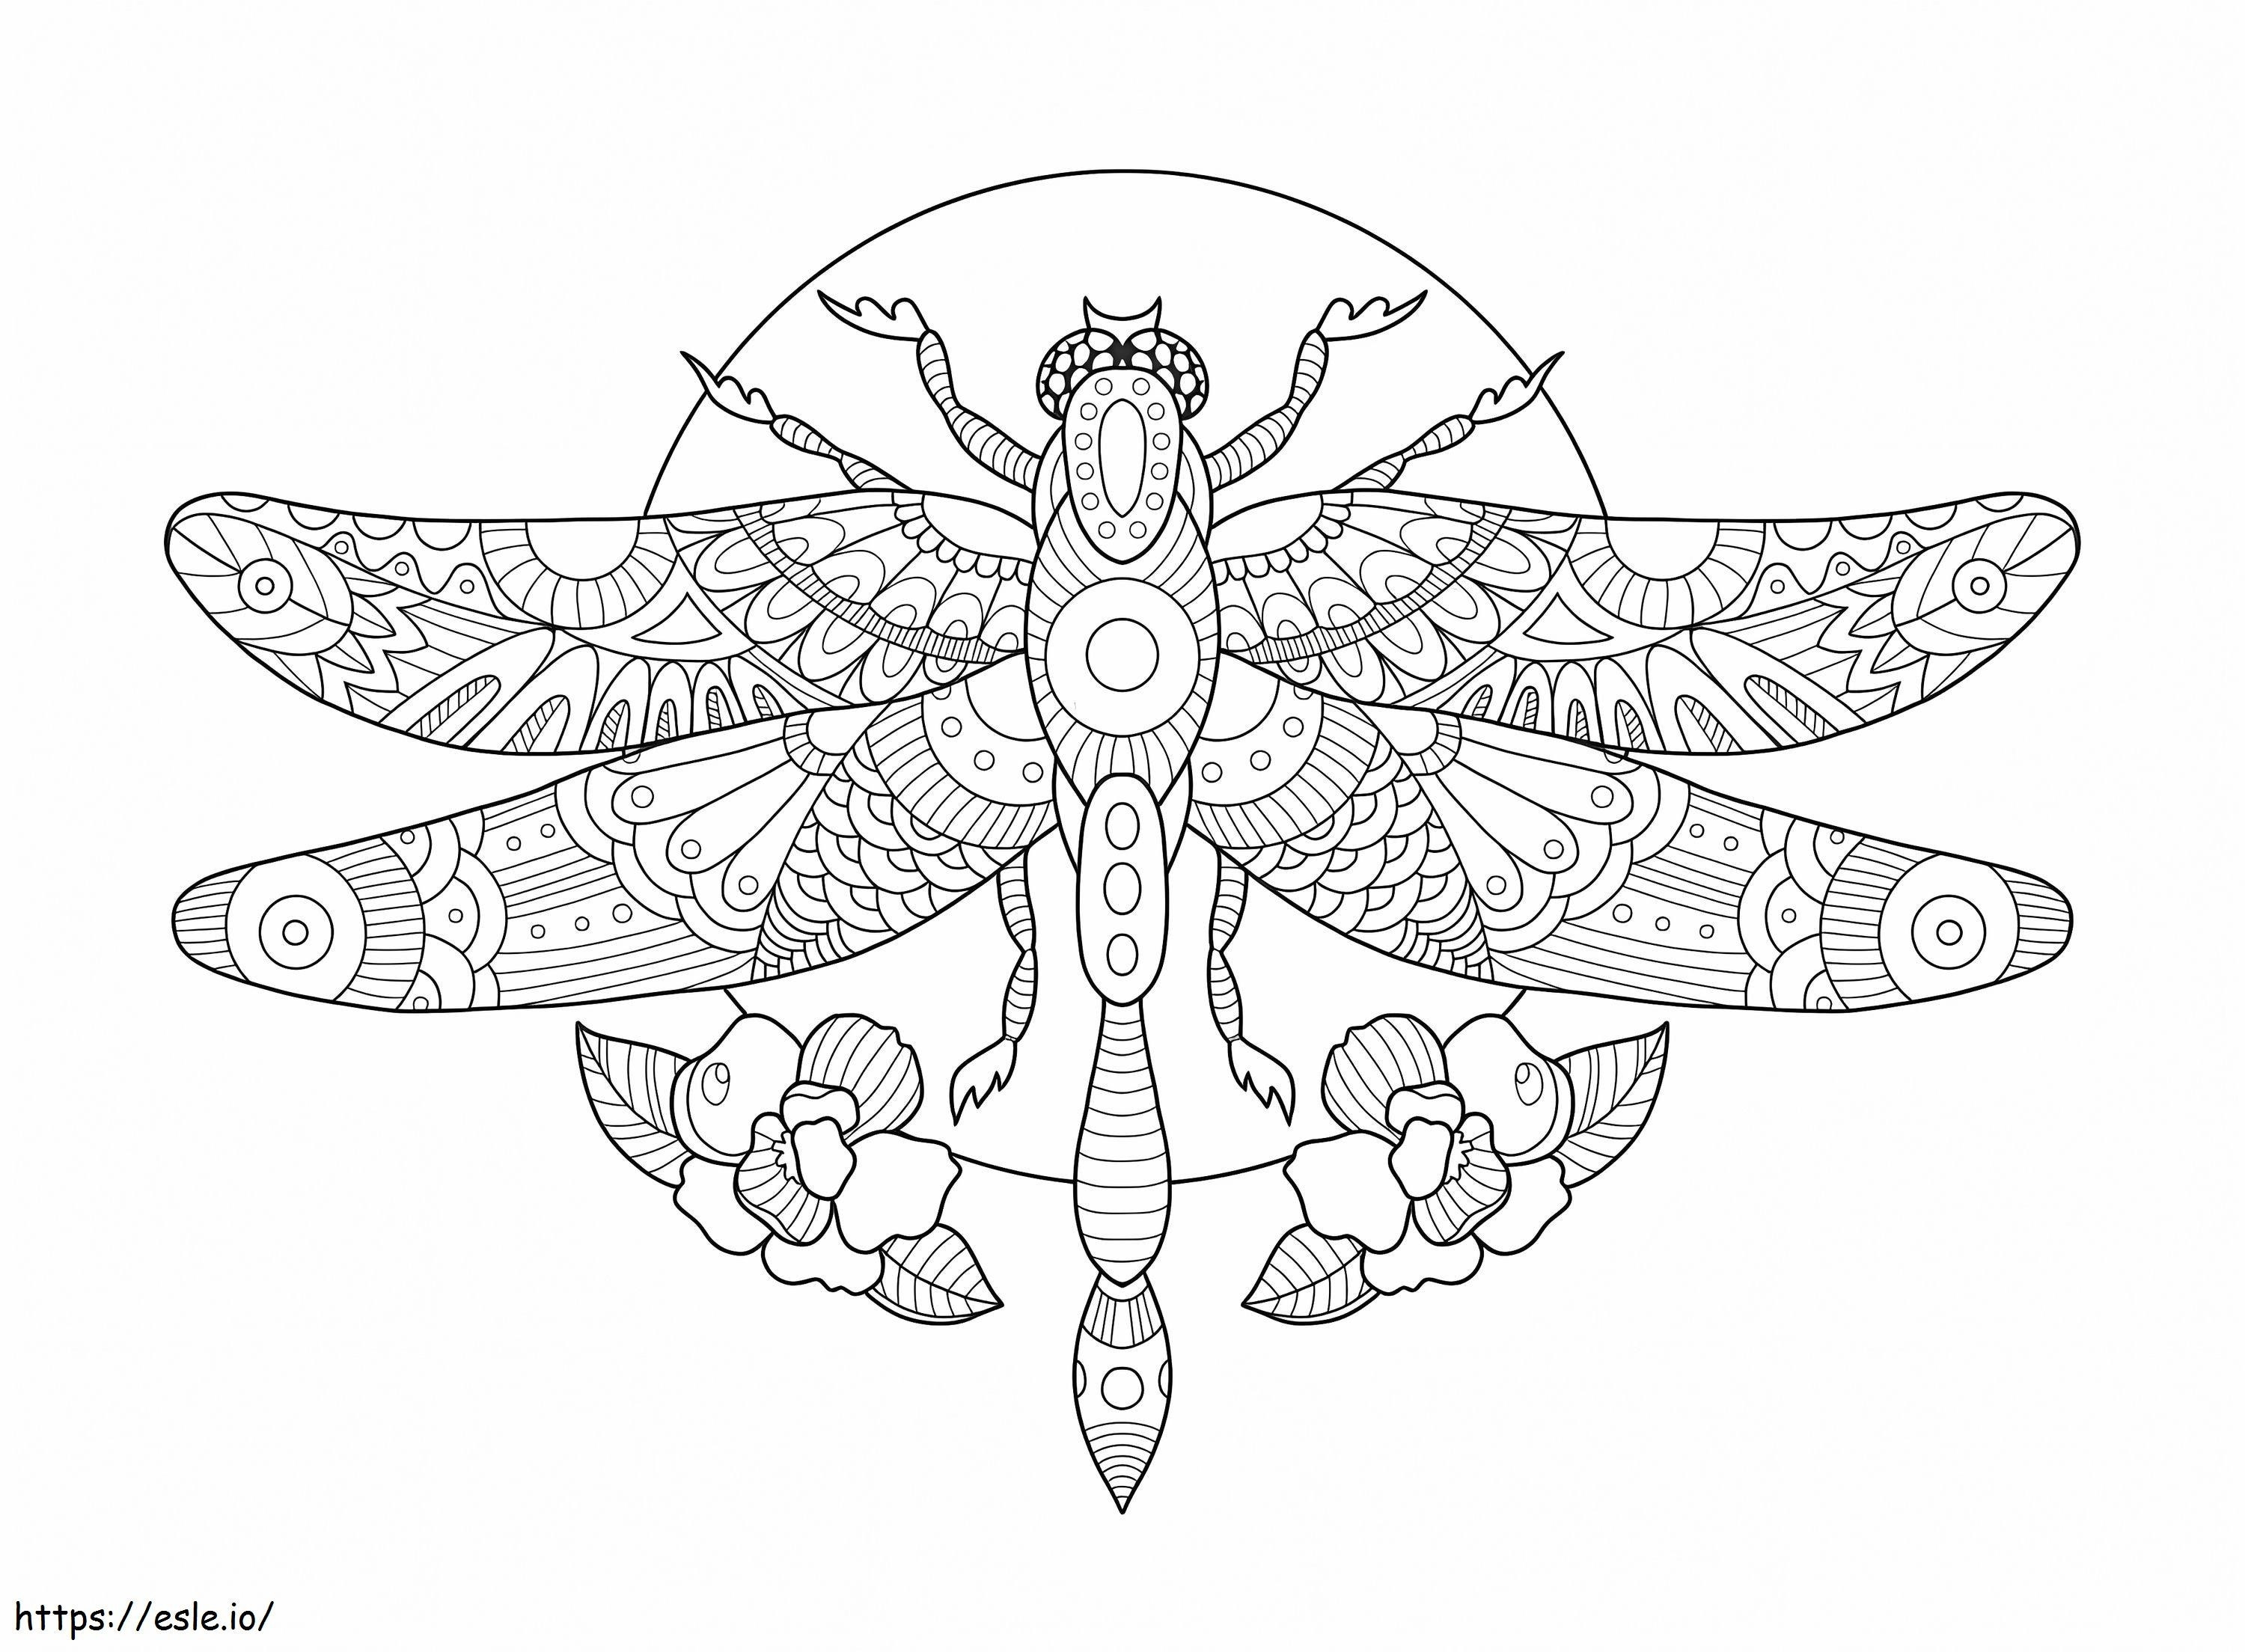 Wonderful Dragonfly coloring page